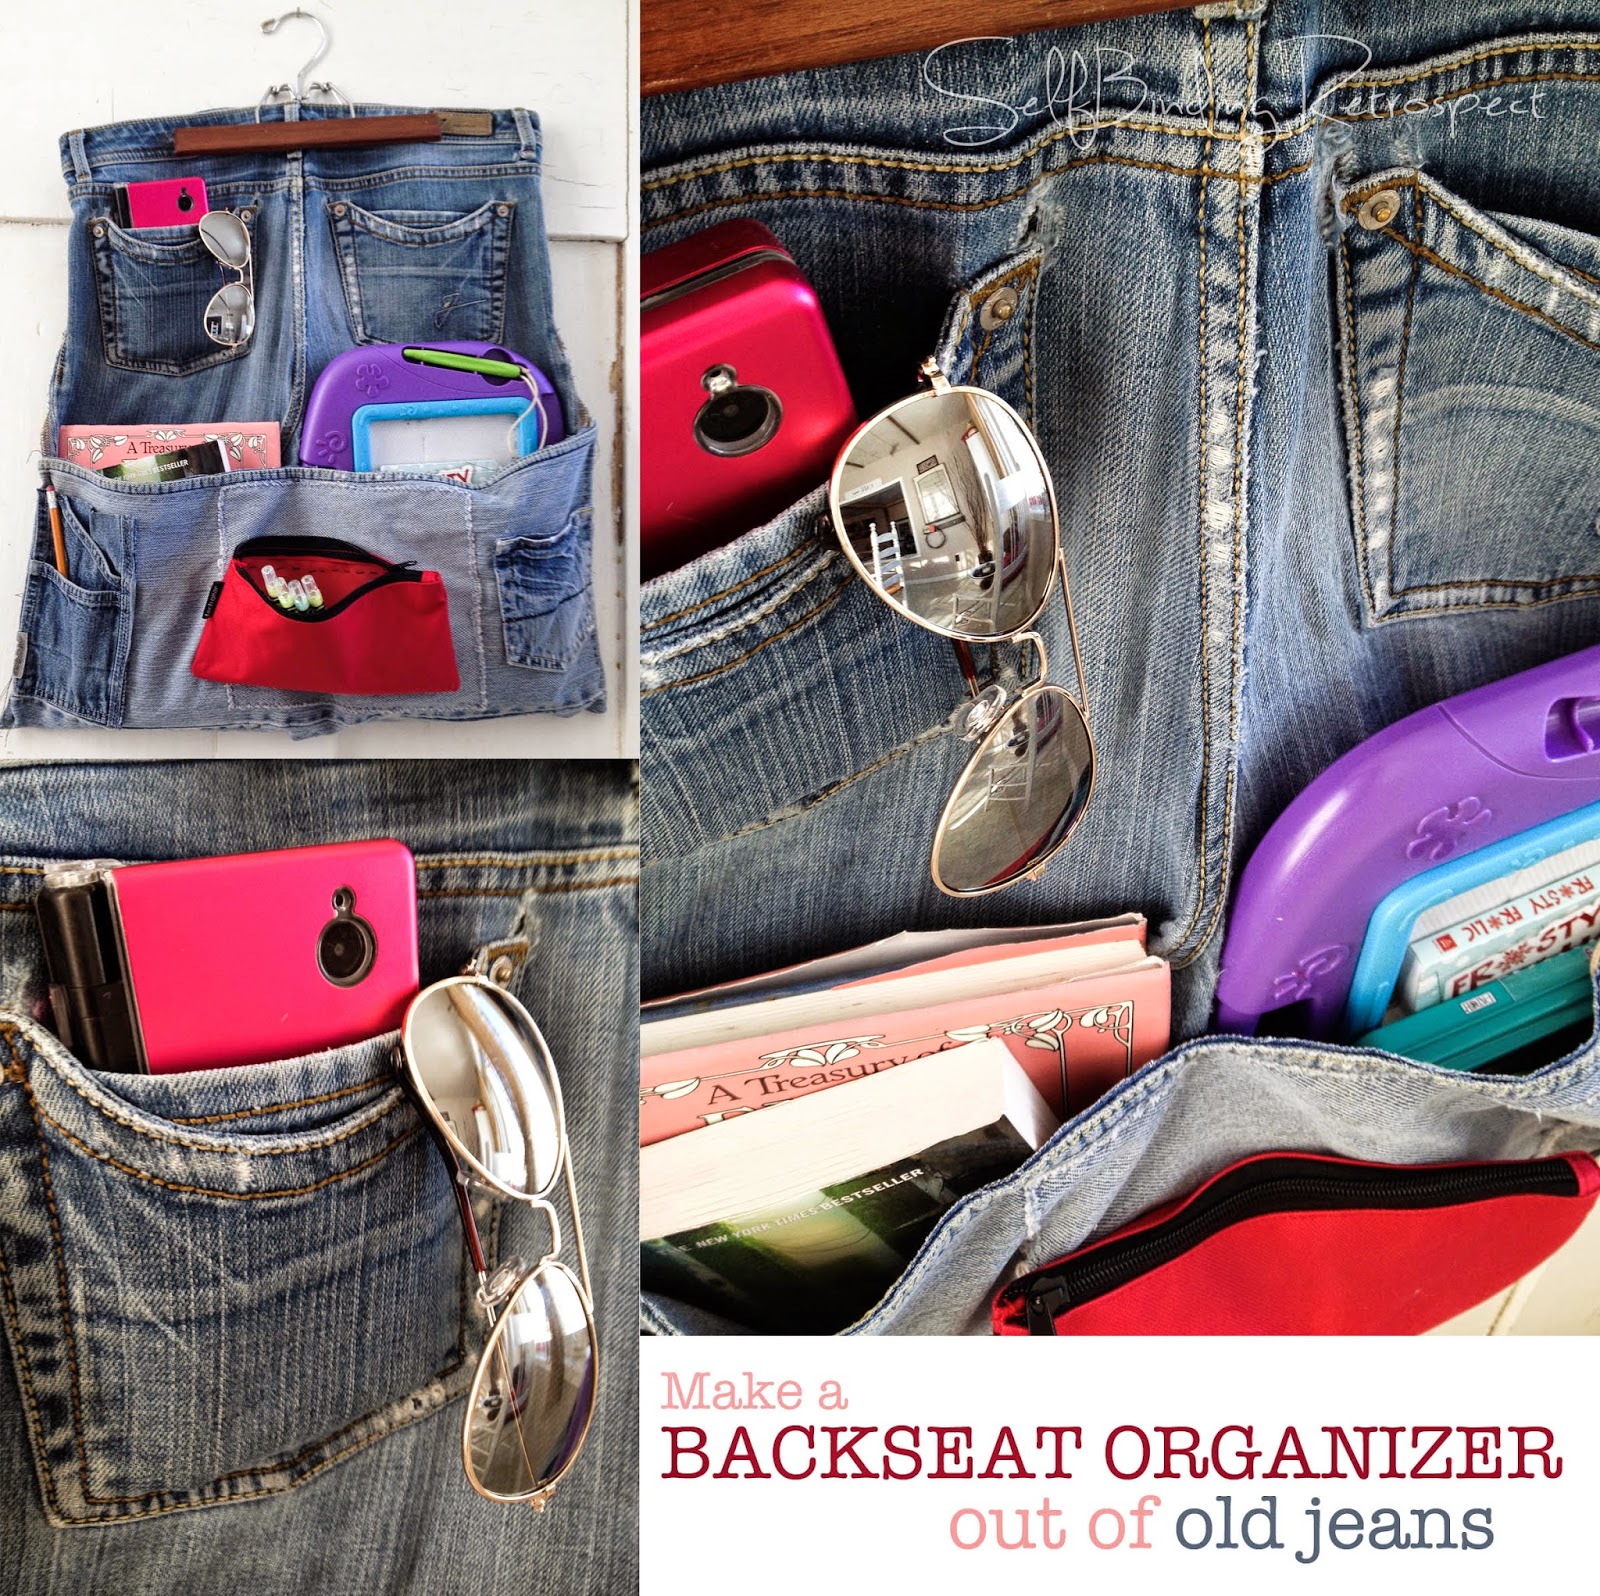 Make a backseat organizer out of old jeans 